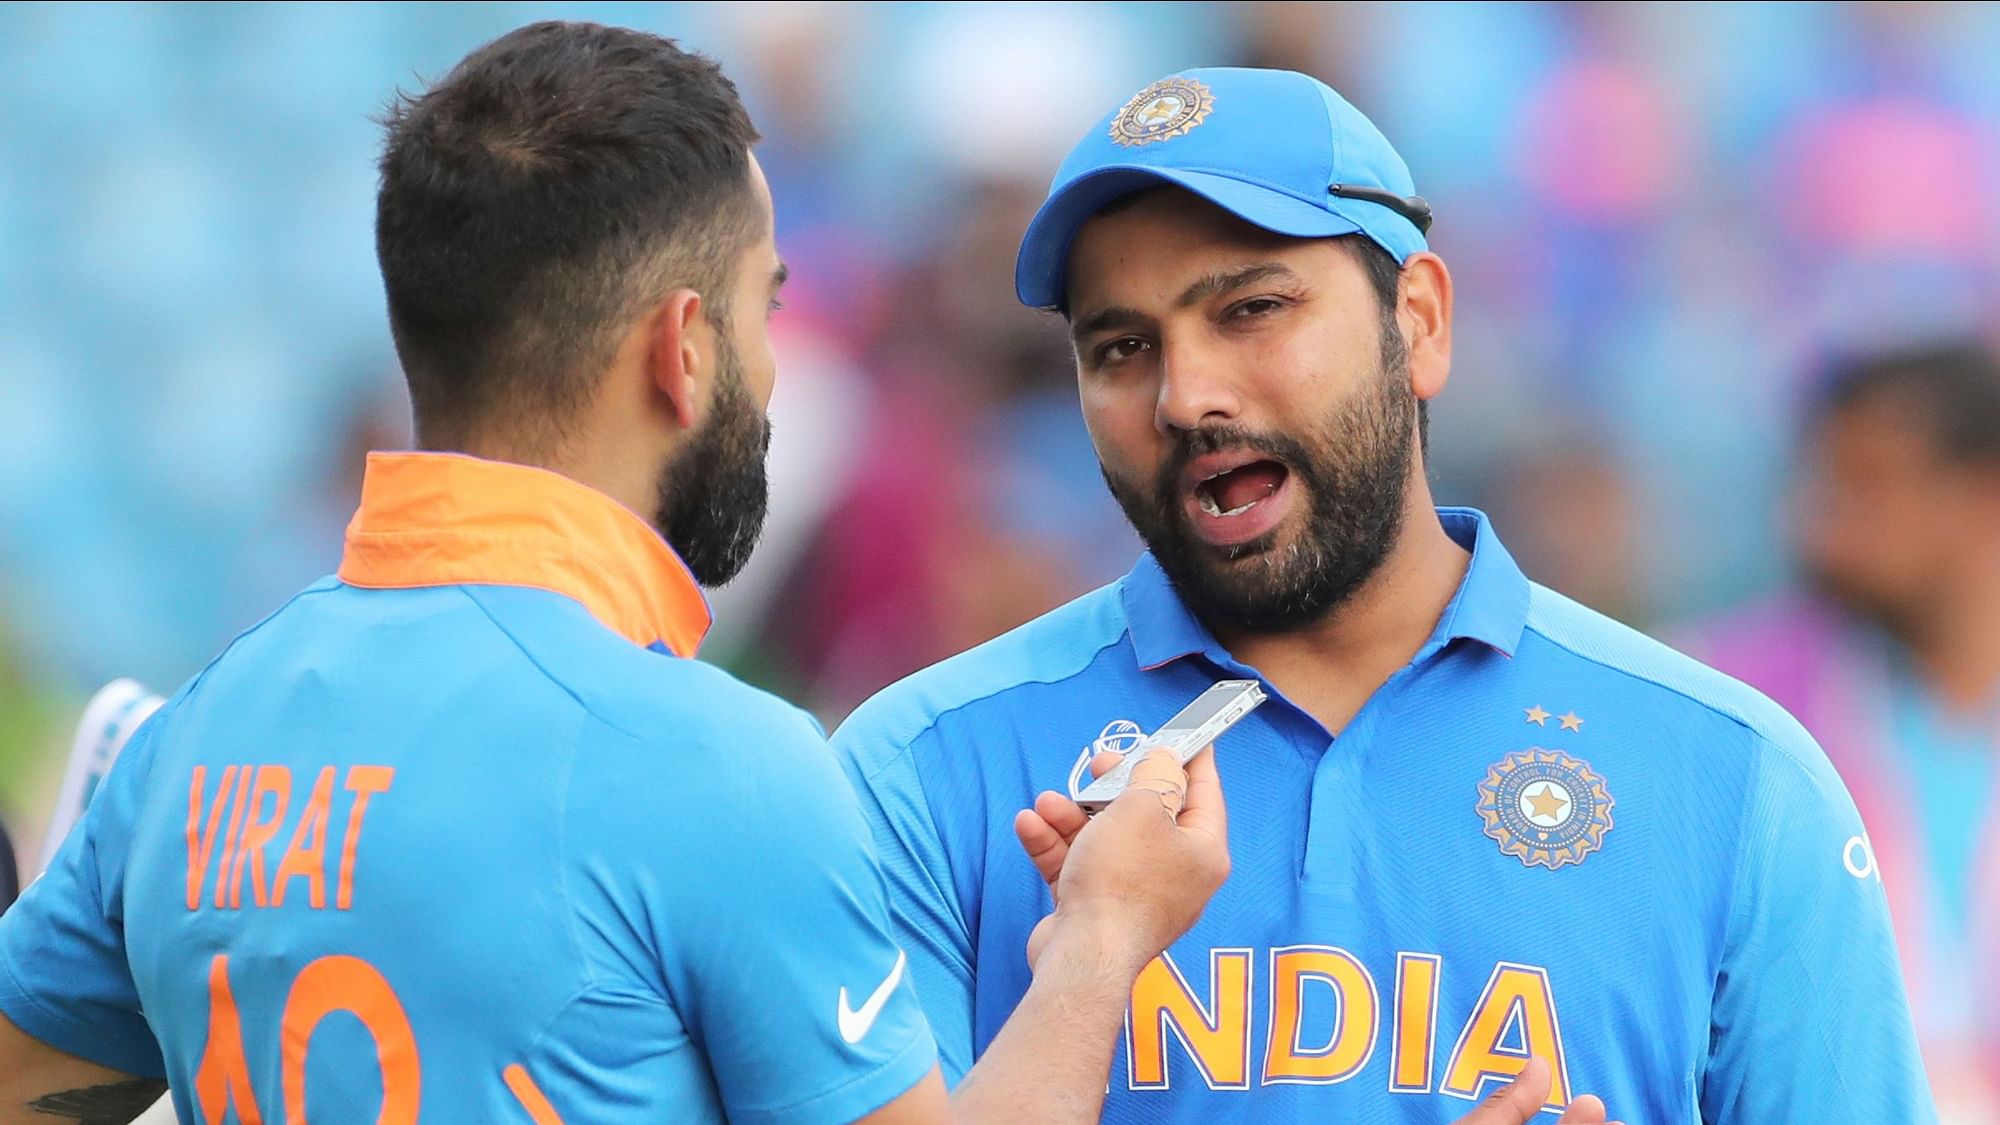 Rohit Sharma scored a record-breaking century as Virat Kohli-led India beat Sri Lanka by 7 wickets in the ICC World Cup.